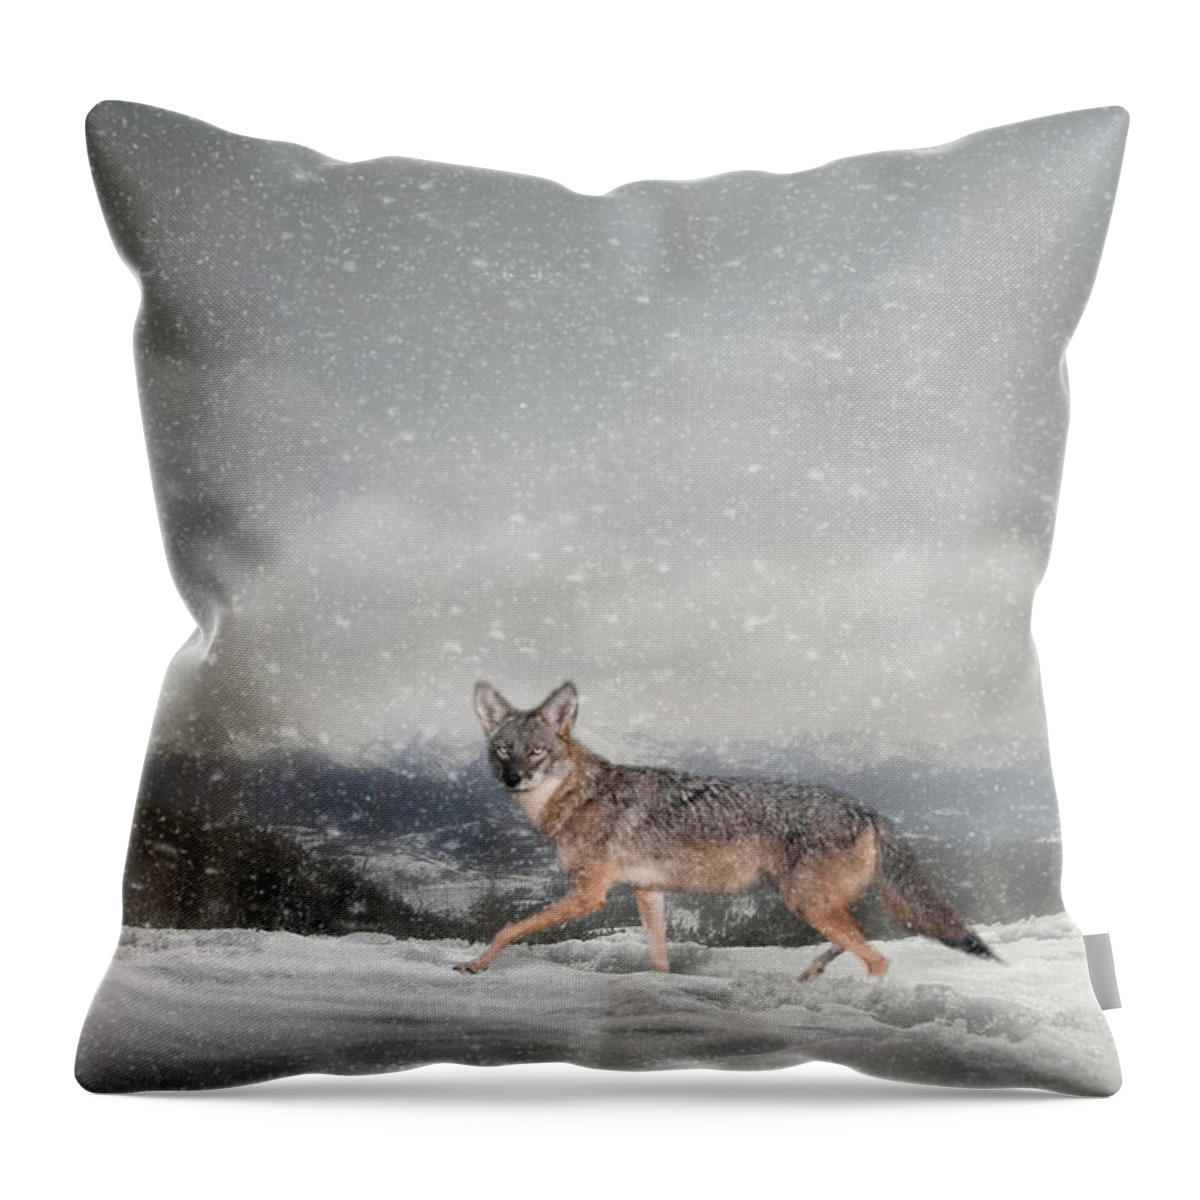 Coyote Throw Pillow featuring the photograph Snow Trekker by Jai Johnson